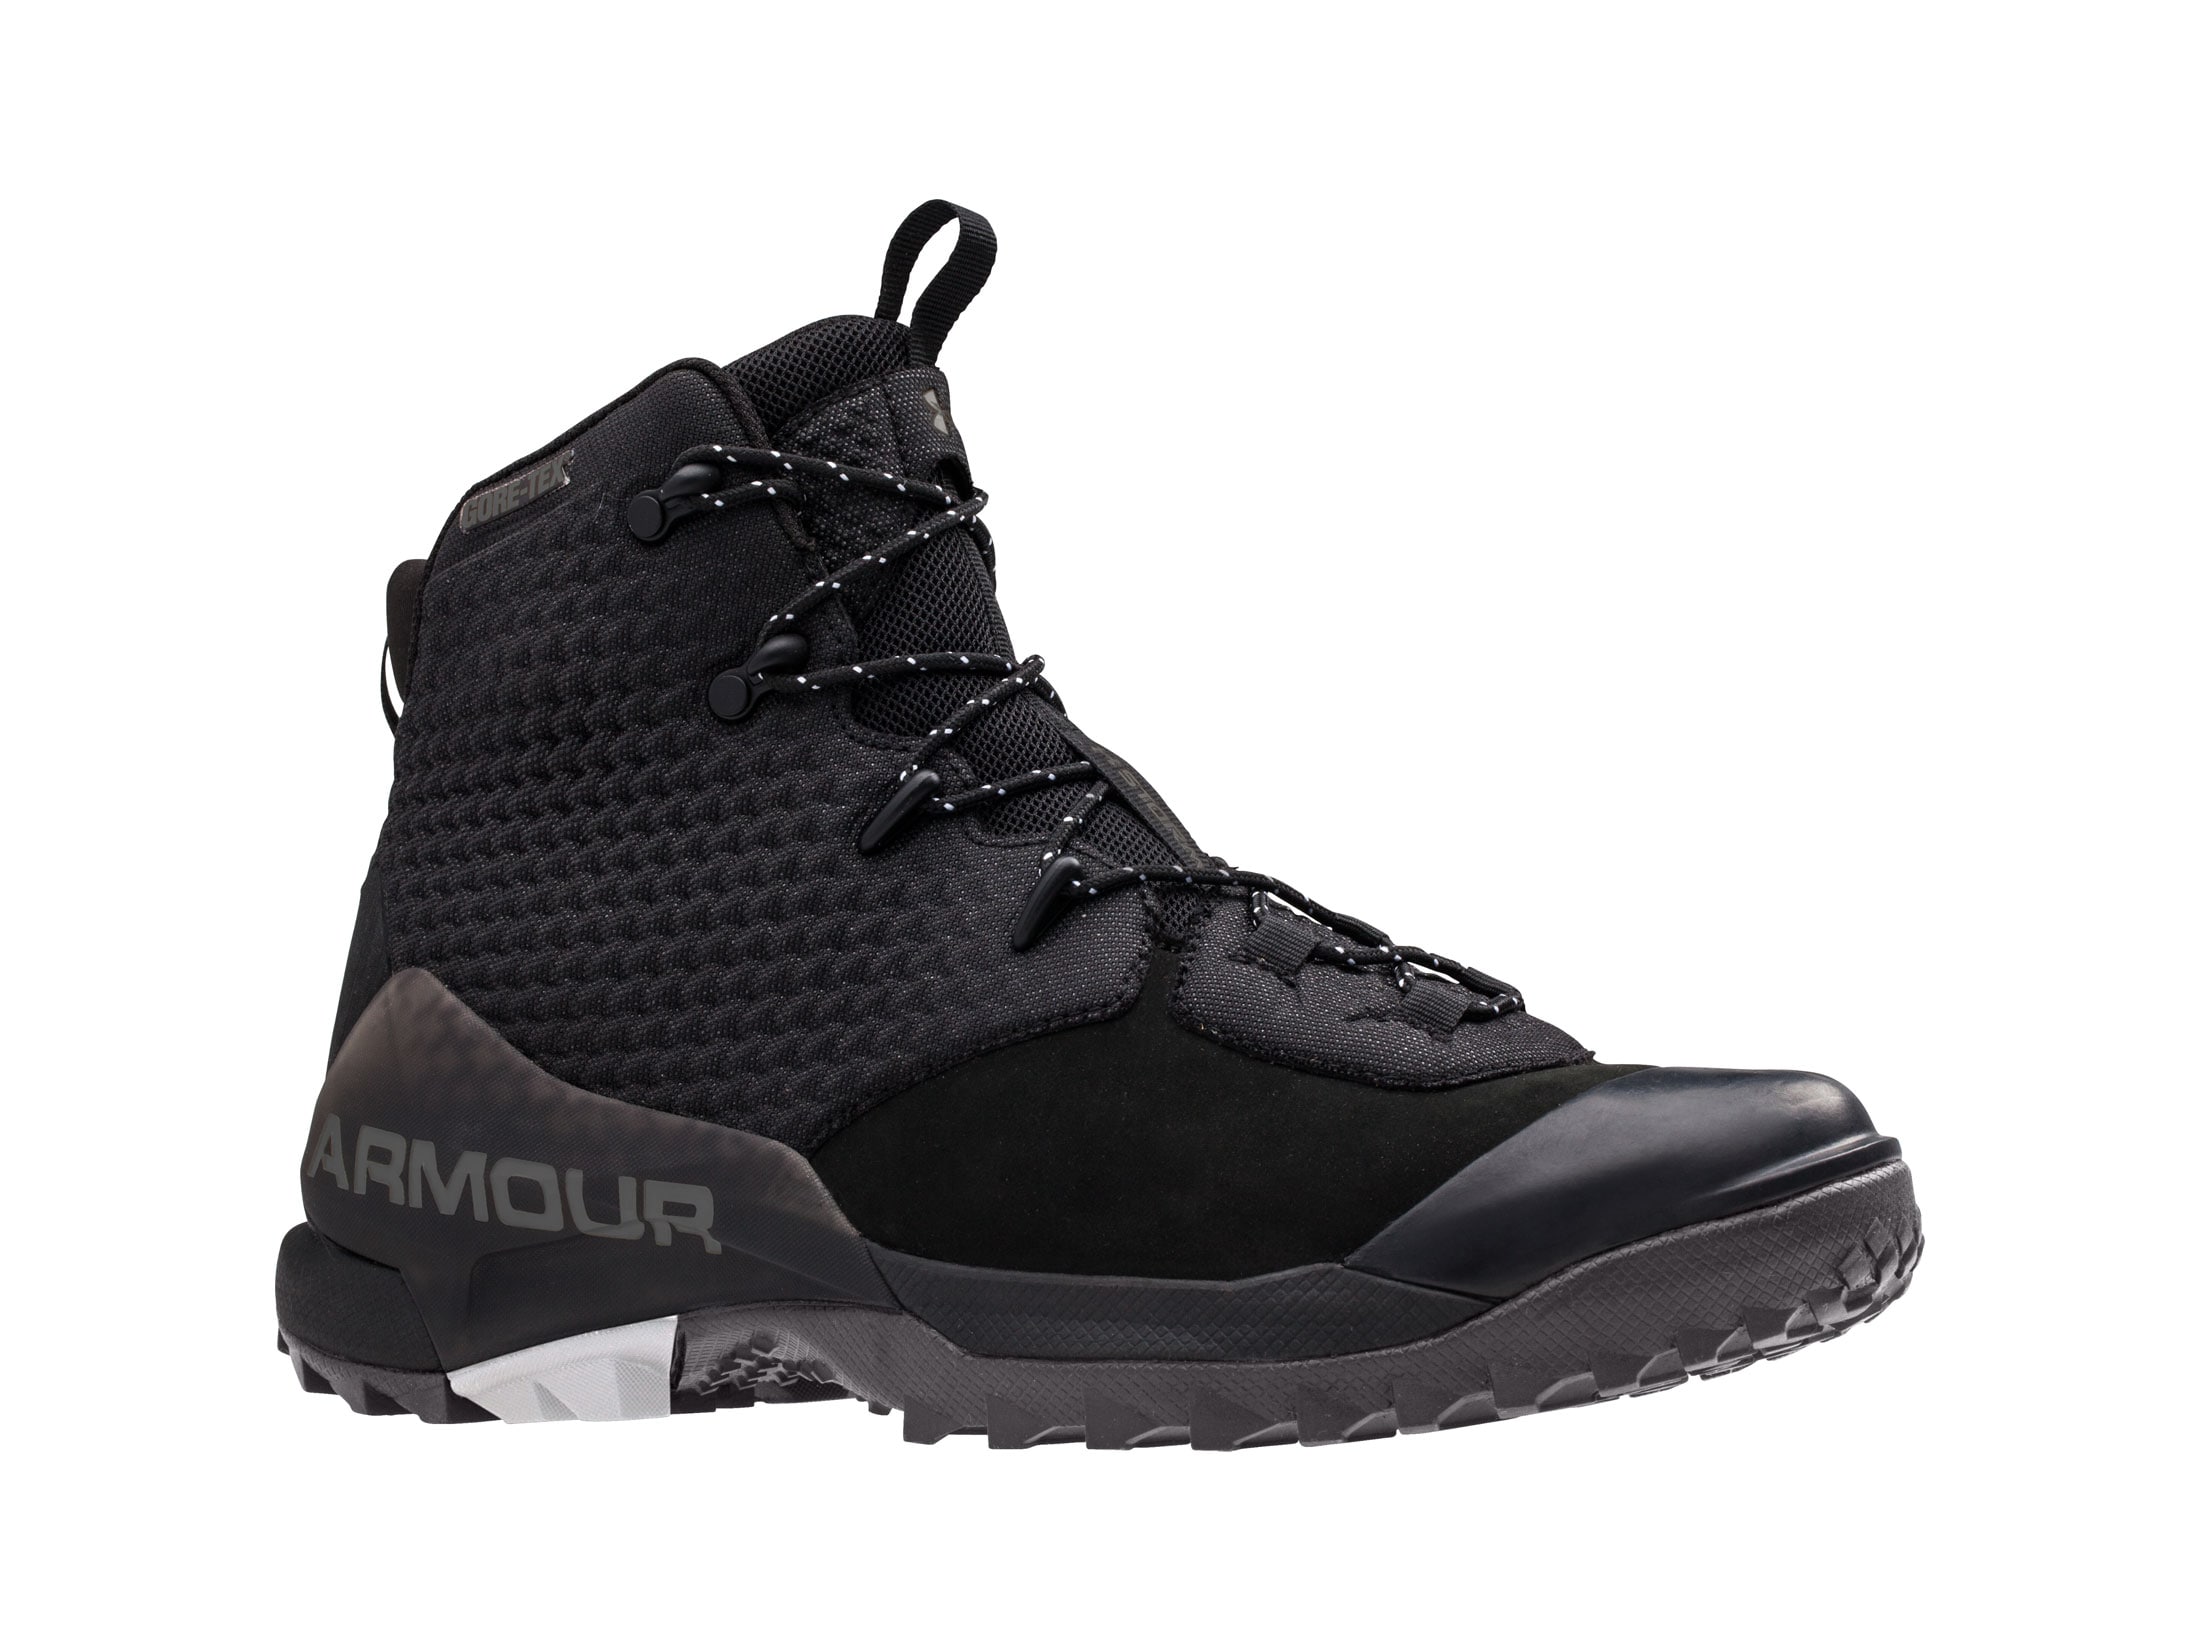 Under Armour UA Infil Hike GTX 6 Waterproof Hiking Boots Leather Black